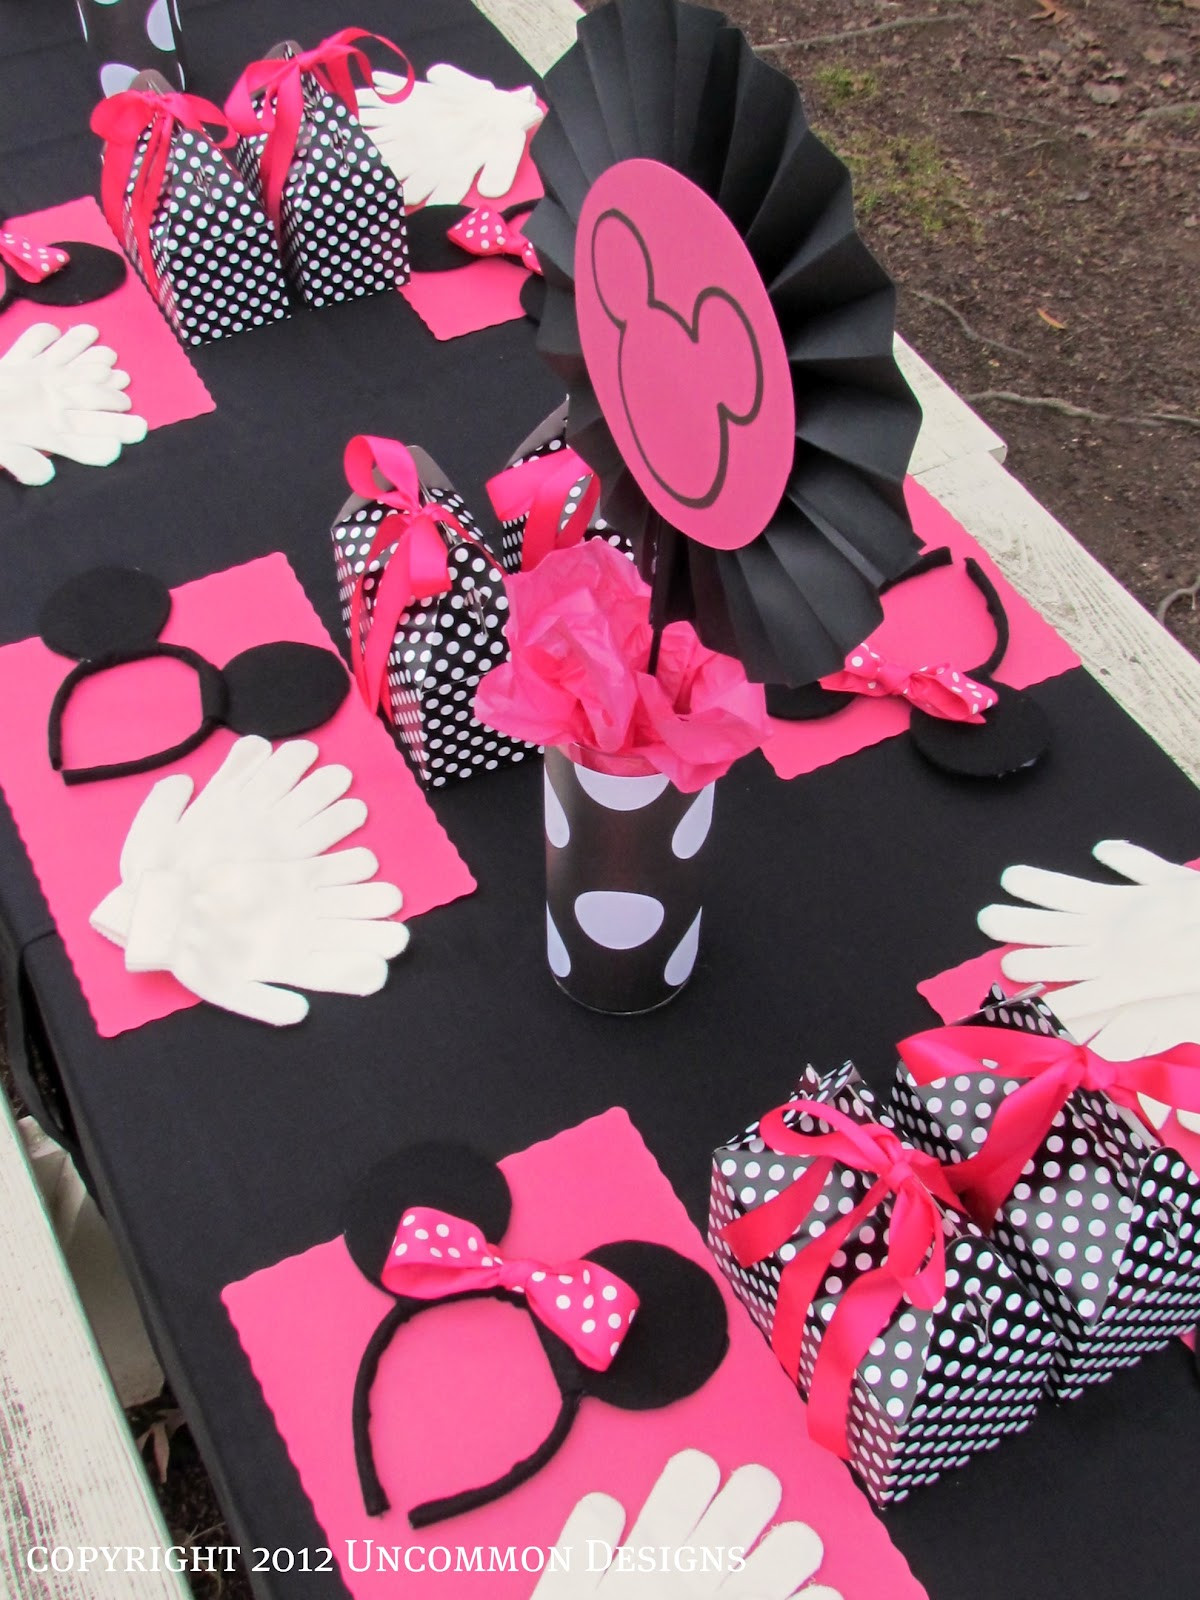 DIY Minnie Mouse Party Decorations
 A Minnie Mouse Birthday Party